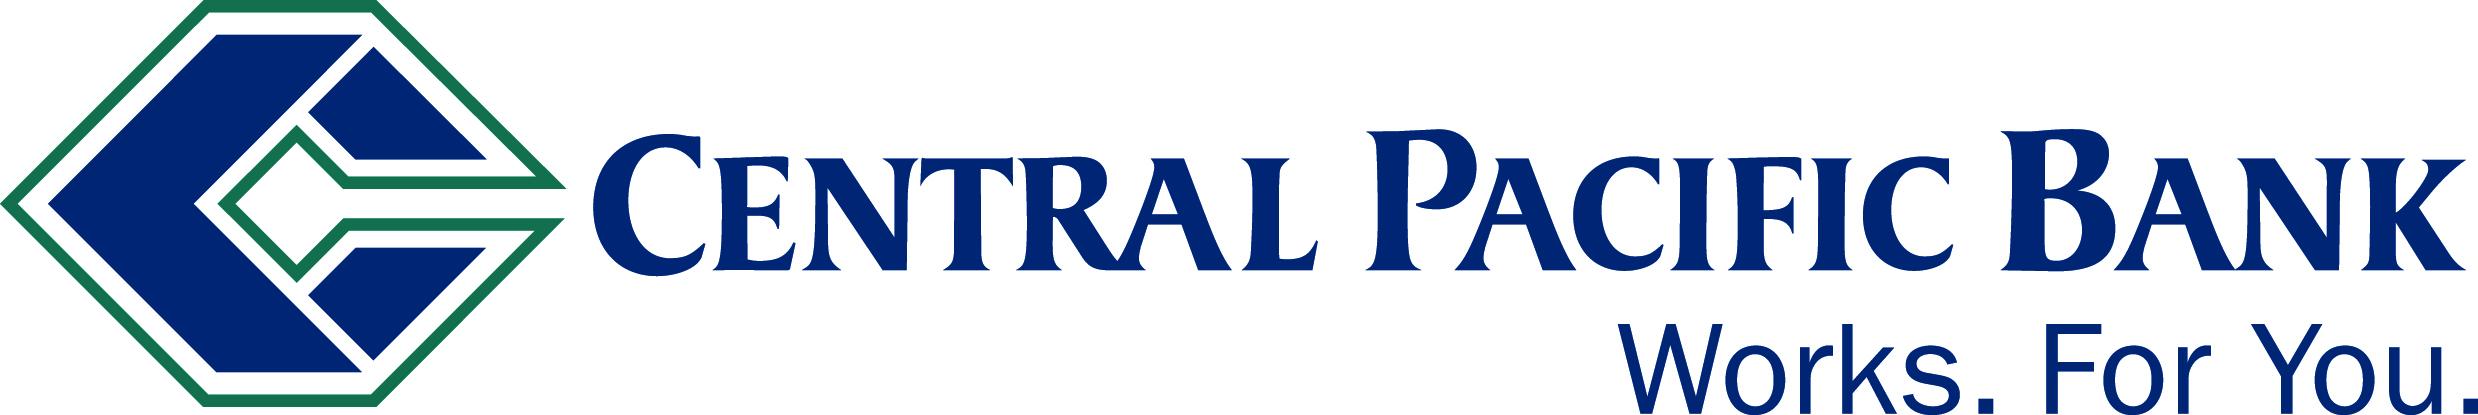 central-pacific-bank.jpg